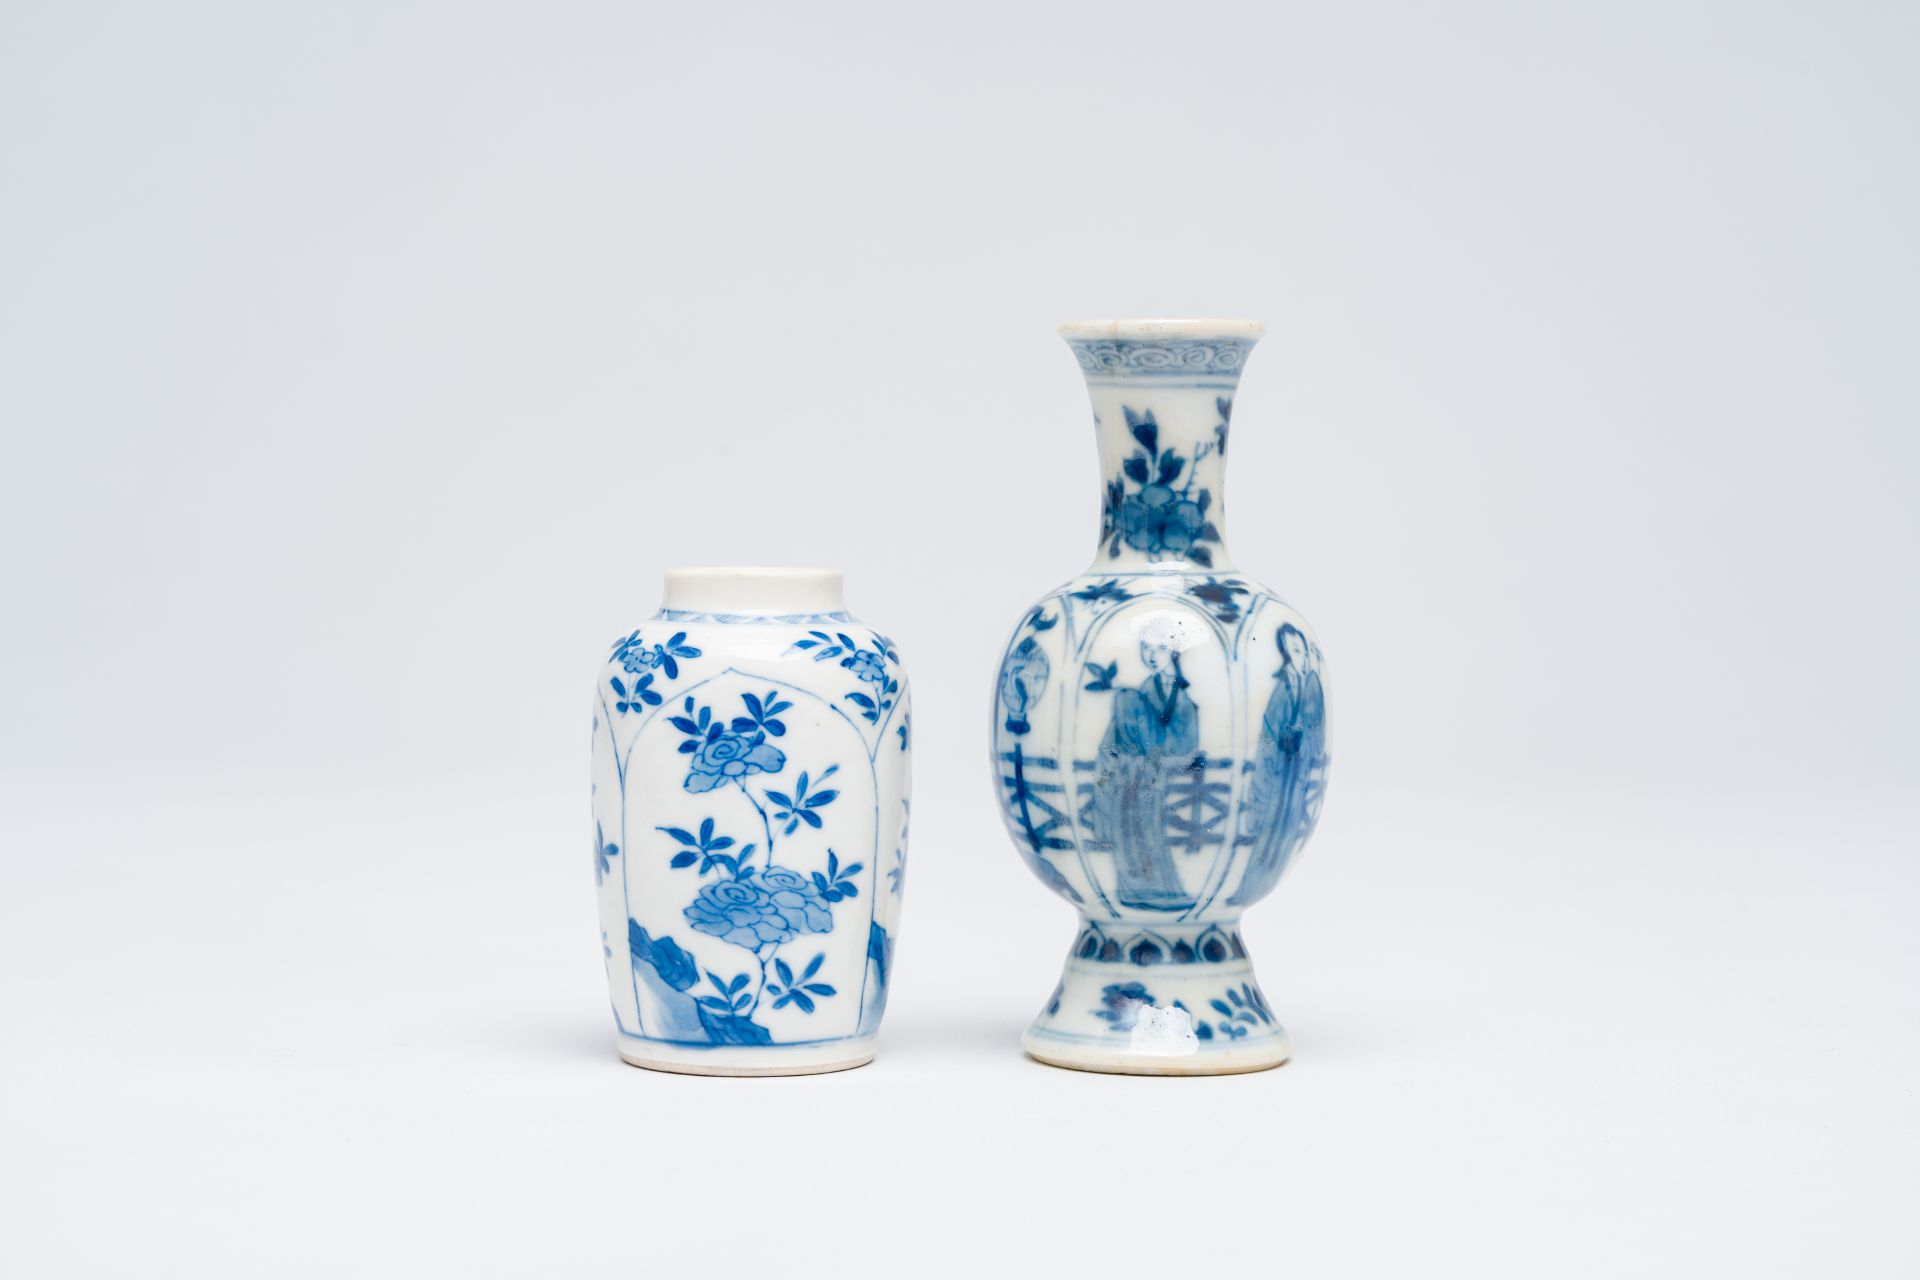 A Chinese blue and white soft paste vase with floral design and a 'ladies and birdcages' vase, Kangx